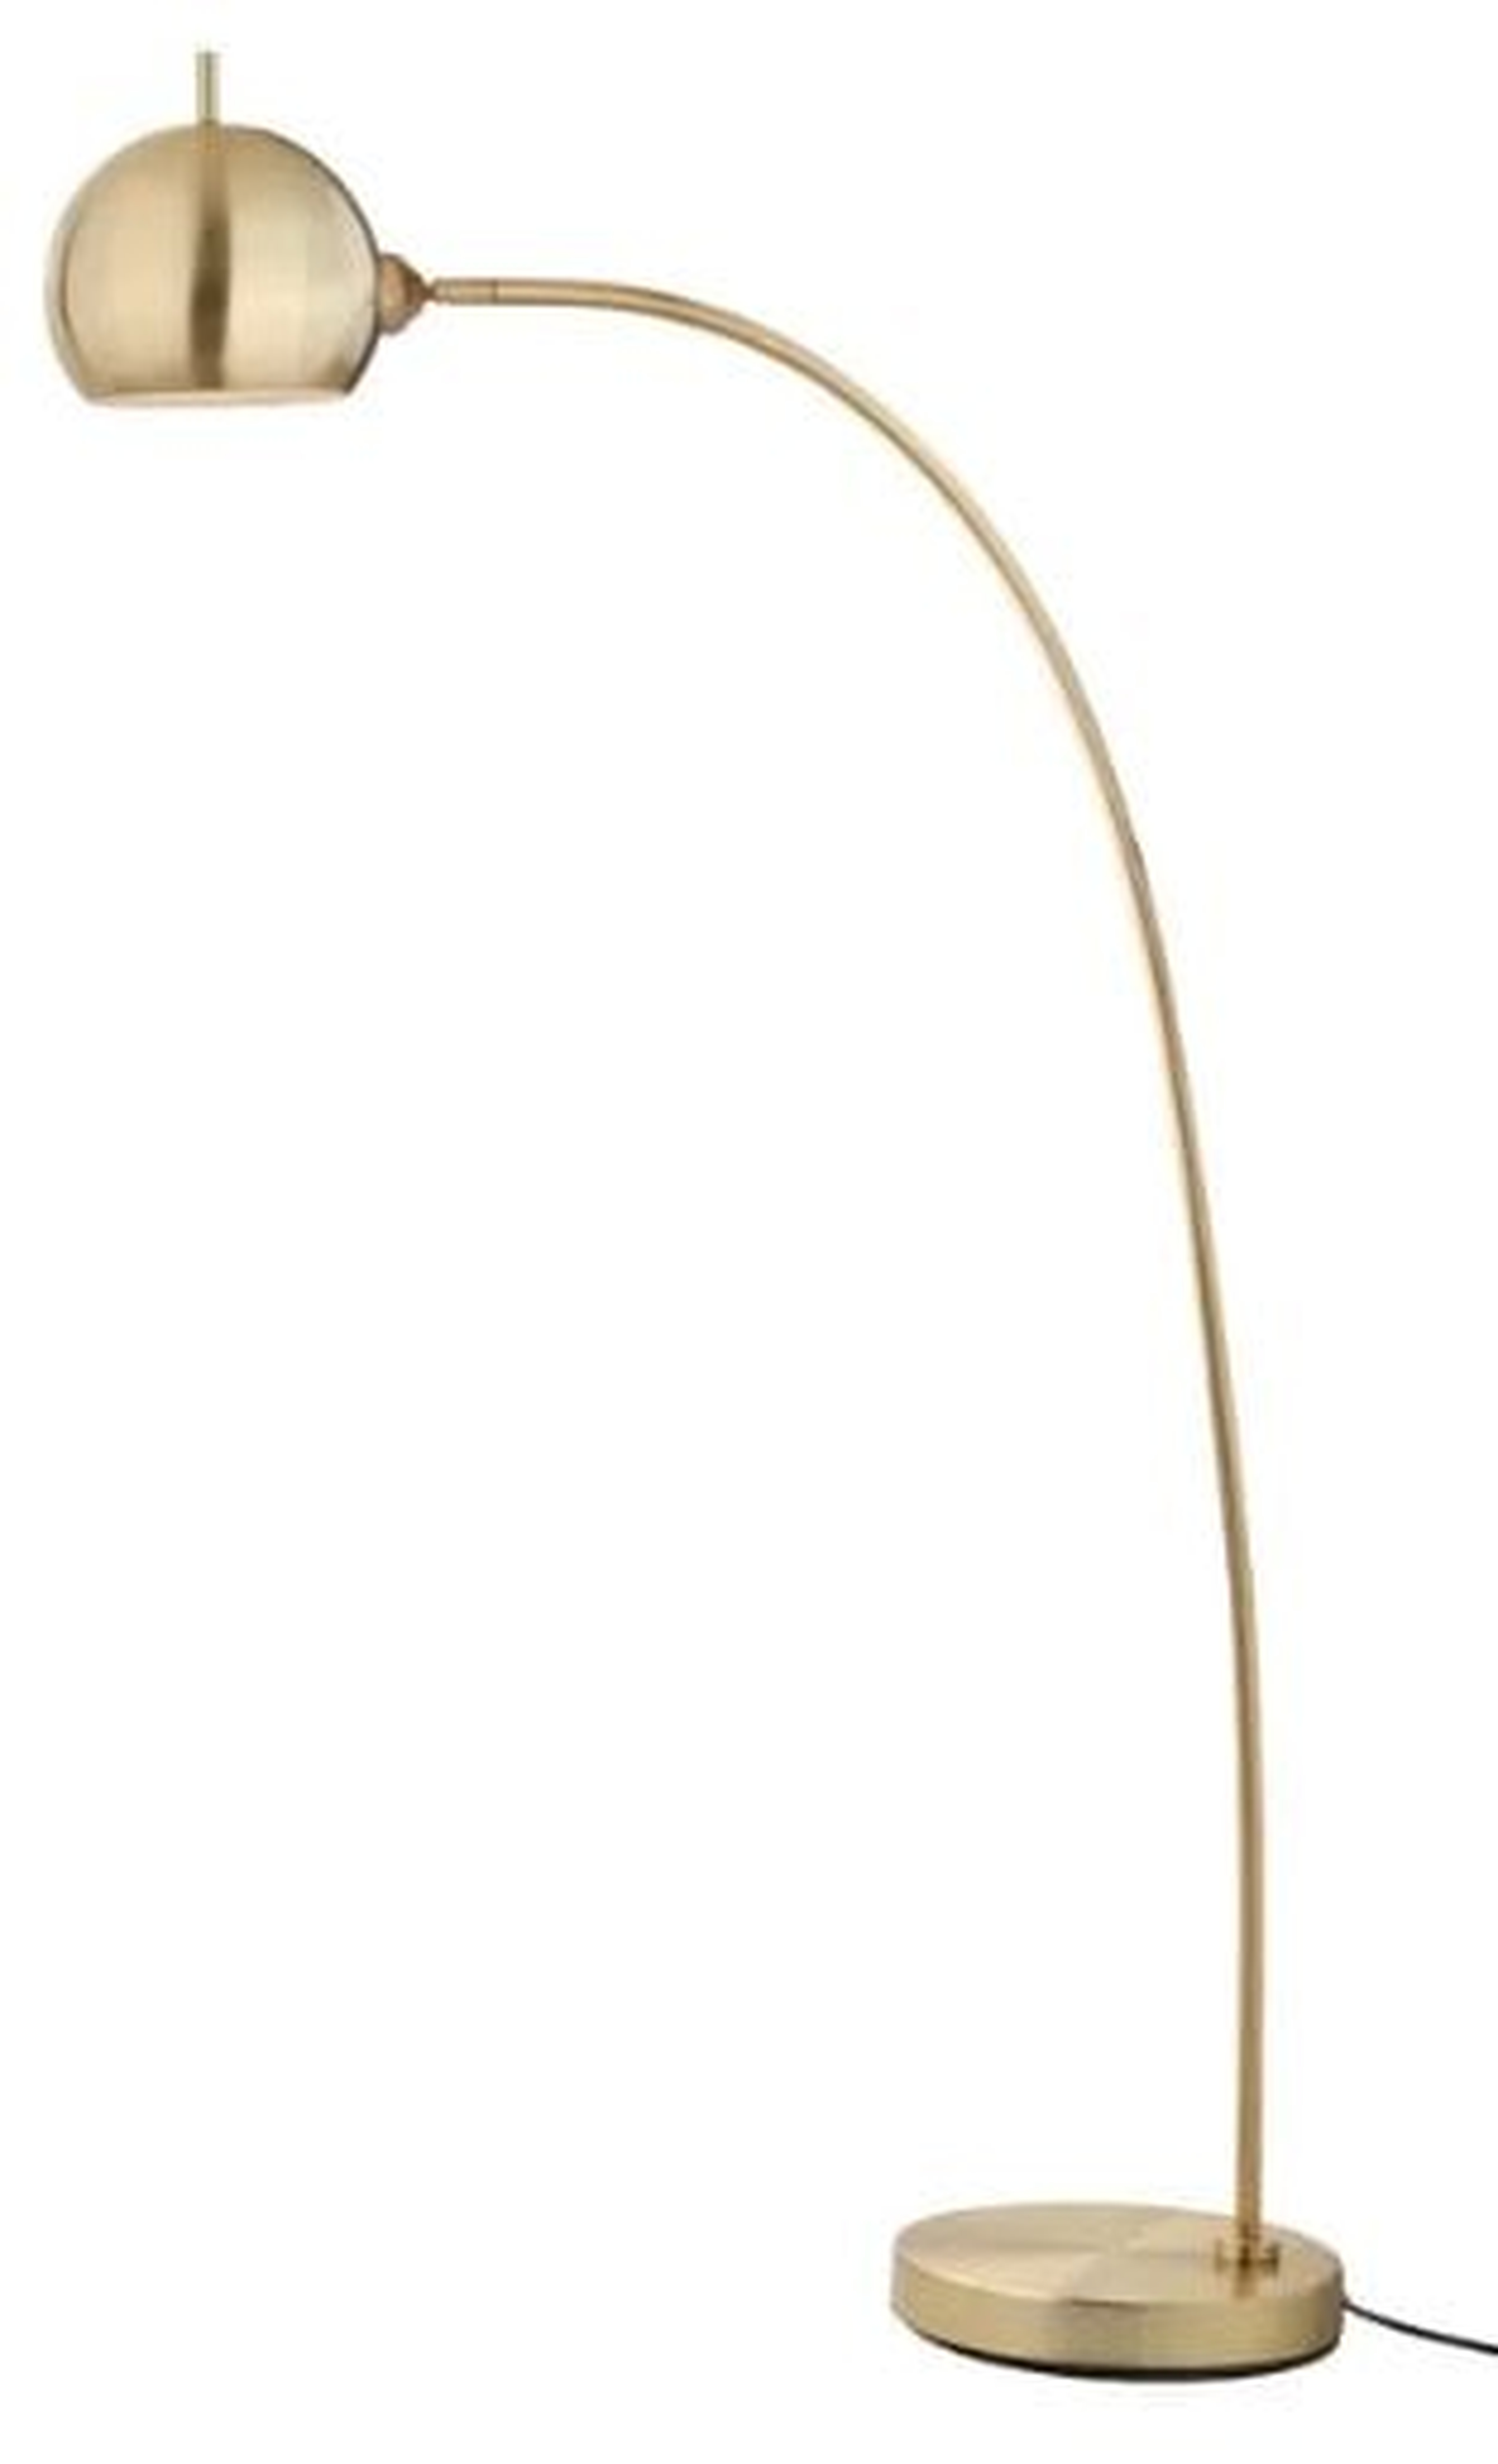 Peavey Arched Floor Lamp, Gold, 66" - AllModern